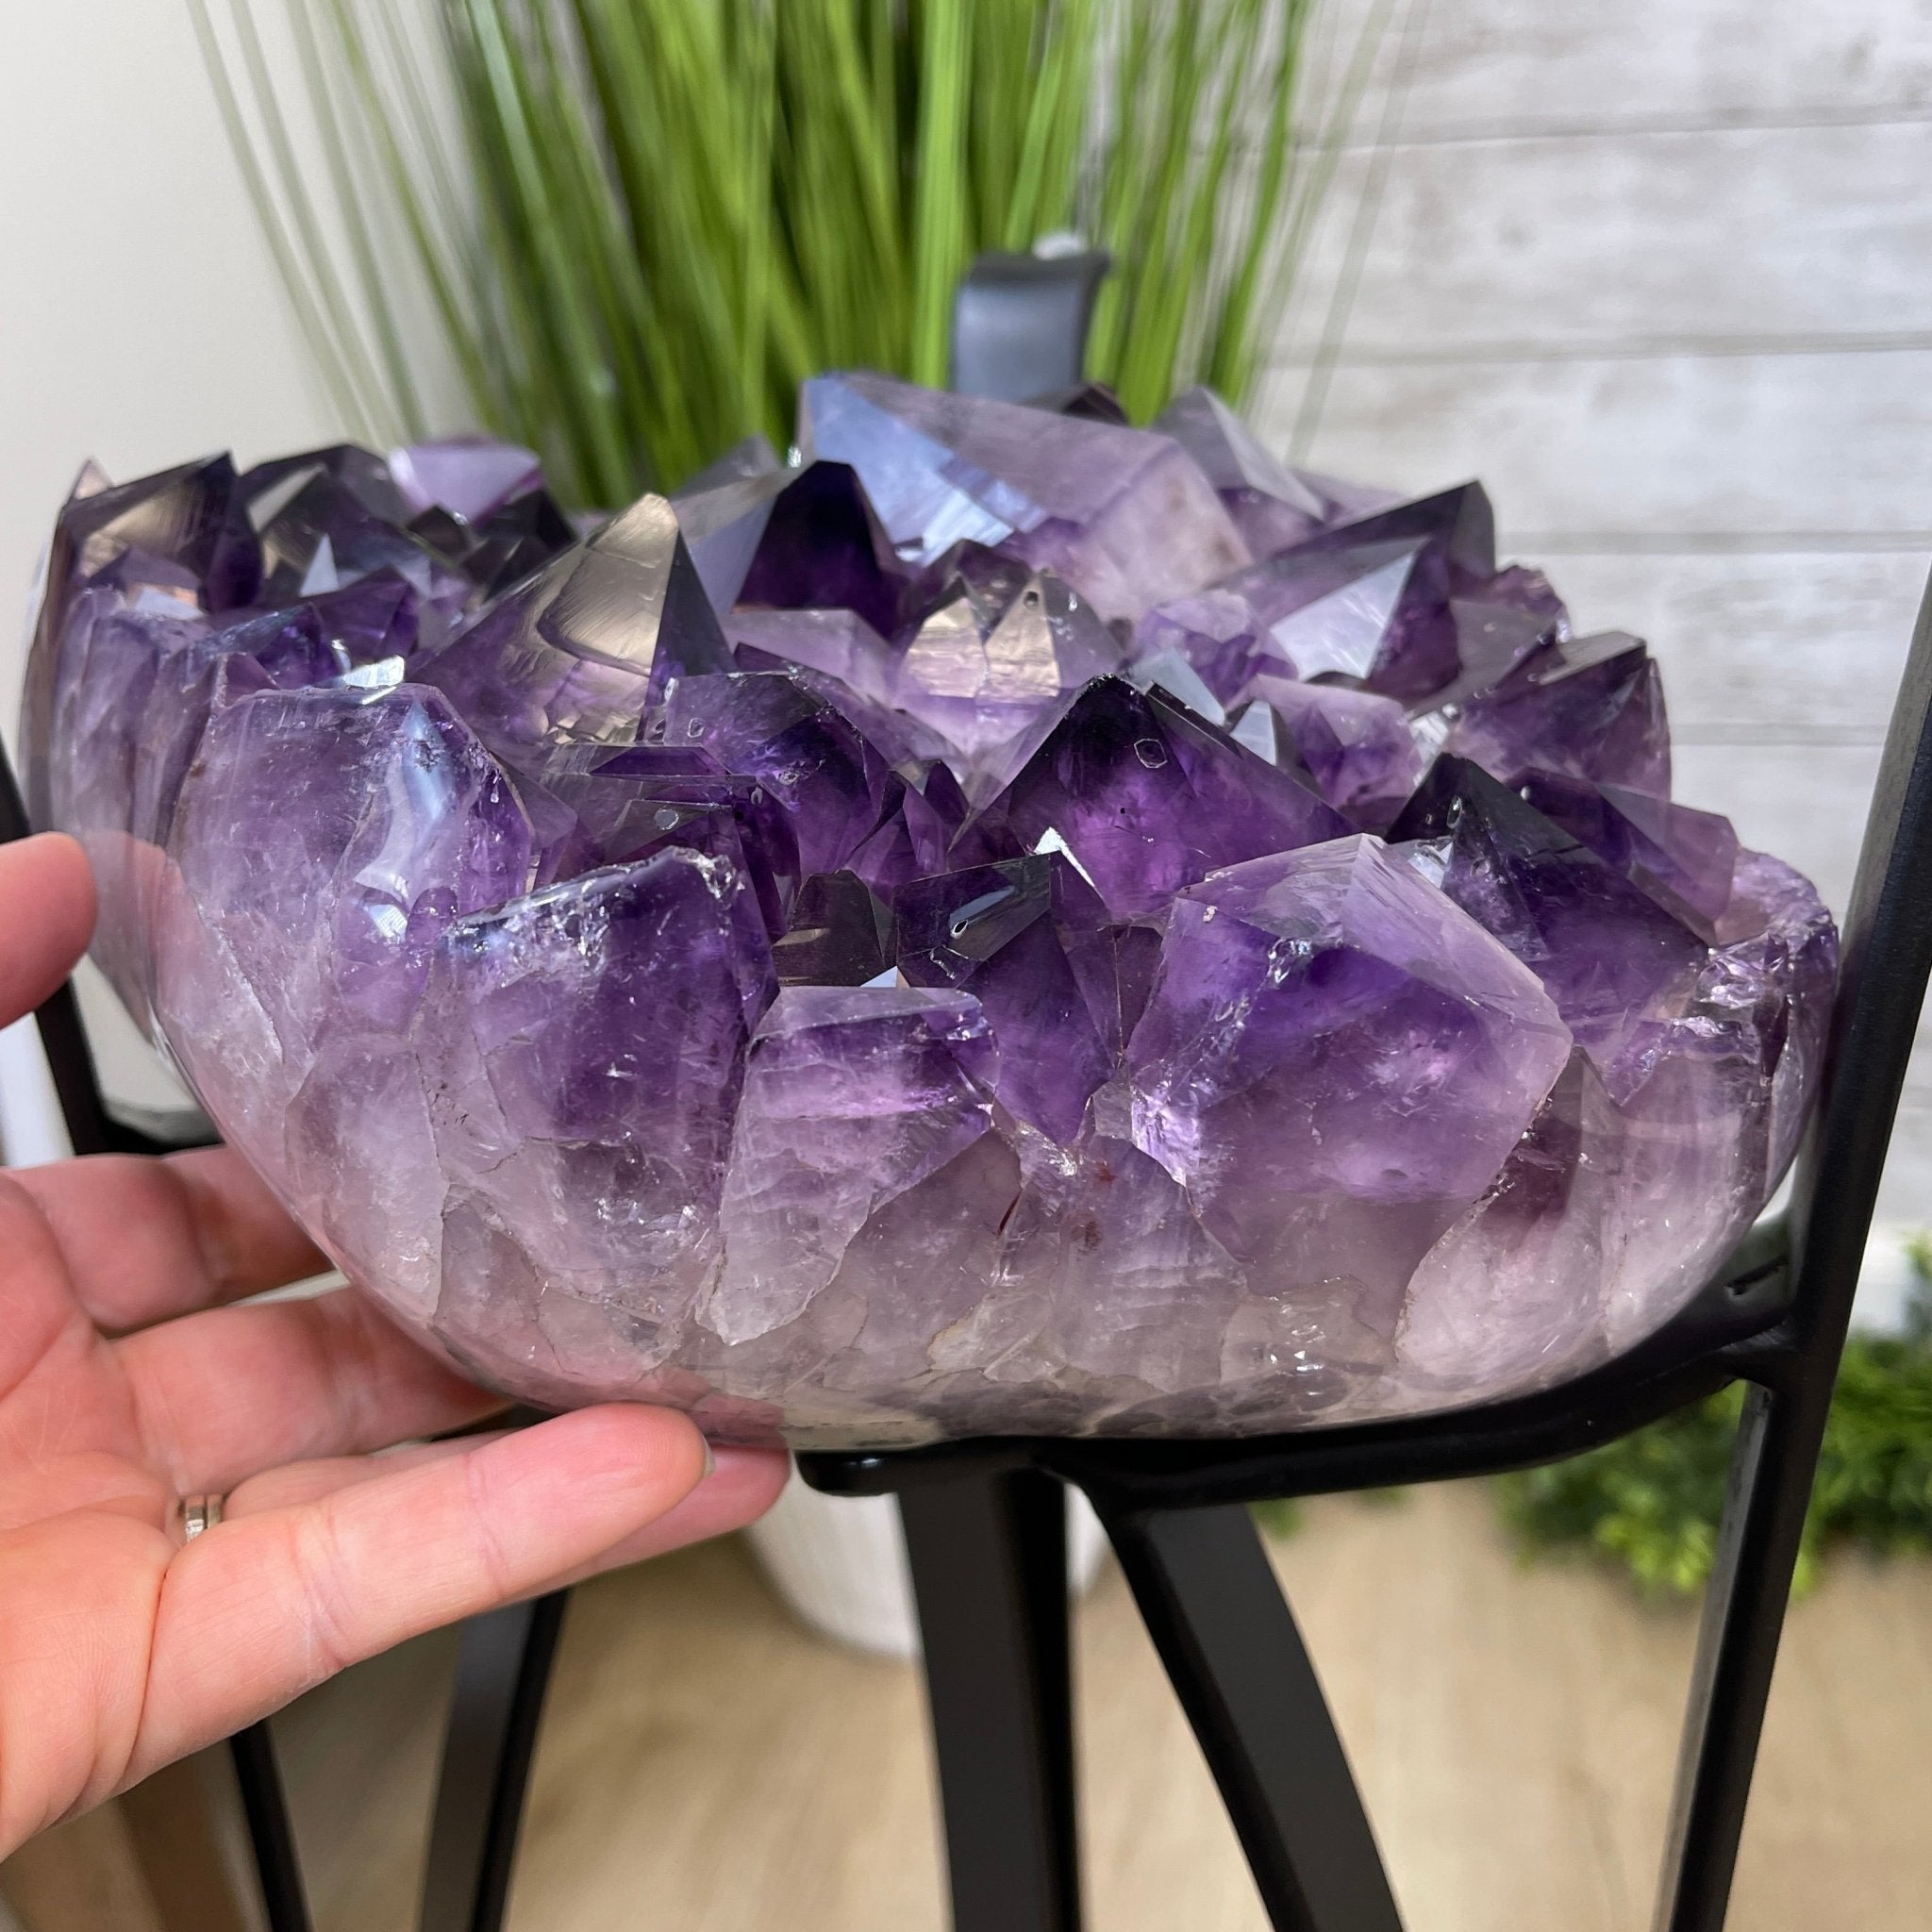 Super Quality Brazilian Amethyst Geode Side Table, 34.3 lbs, 23.6" tall on a metal base #1384-0005 by Brazil Gems - Brazil GemsBrazil GemsSuper Quality Brazilian Amethyst Geode Side Table, 34.3 lbs, 23.6" tall on a metal base #1384-0005 by Brazil GemsTables: Side1384-0005